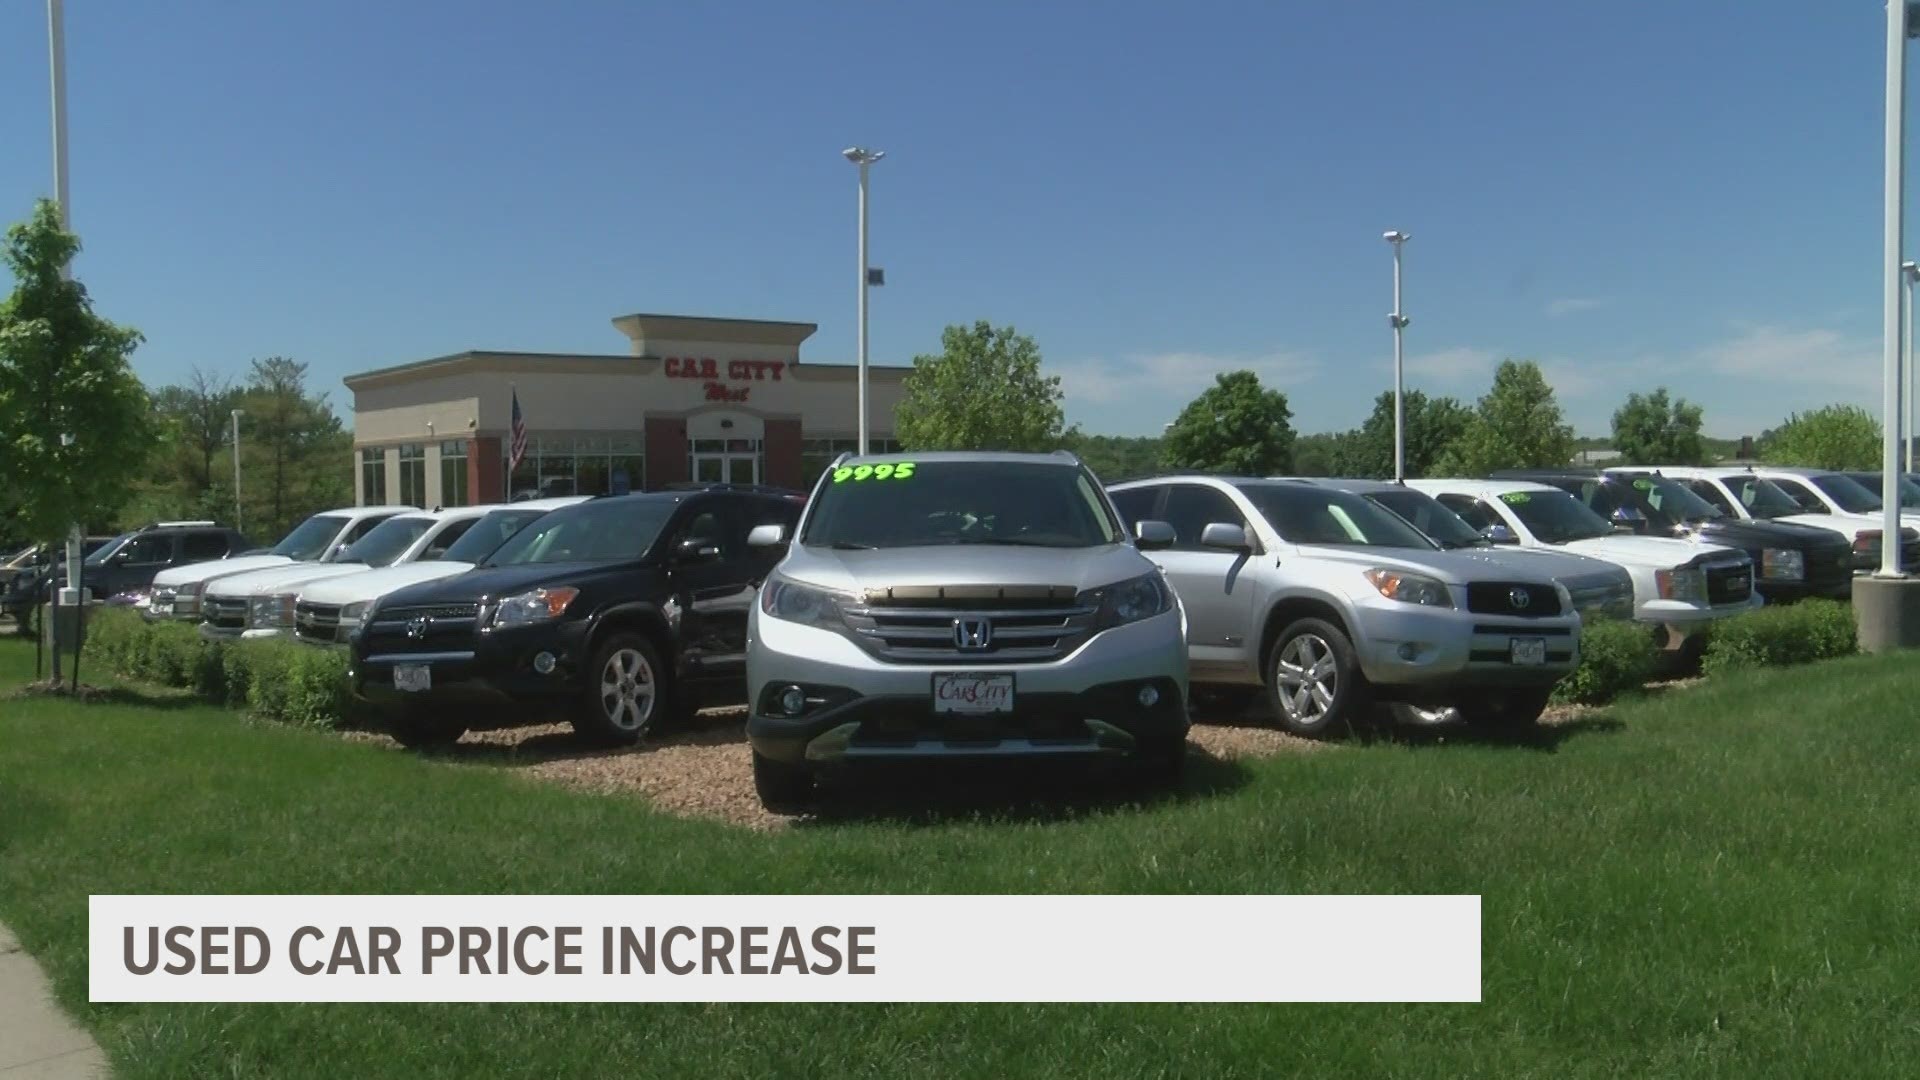 The general manager of a used car shop said over the last few months, he's seen an increase in used cars. Some increasing between three and five thousand dollars.